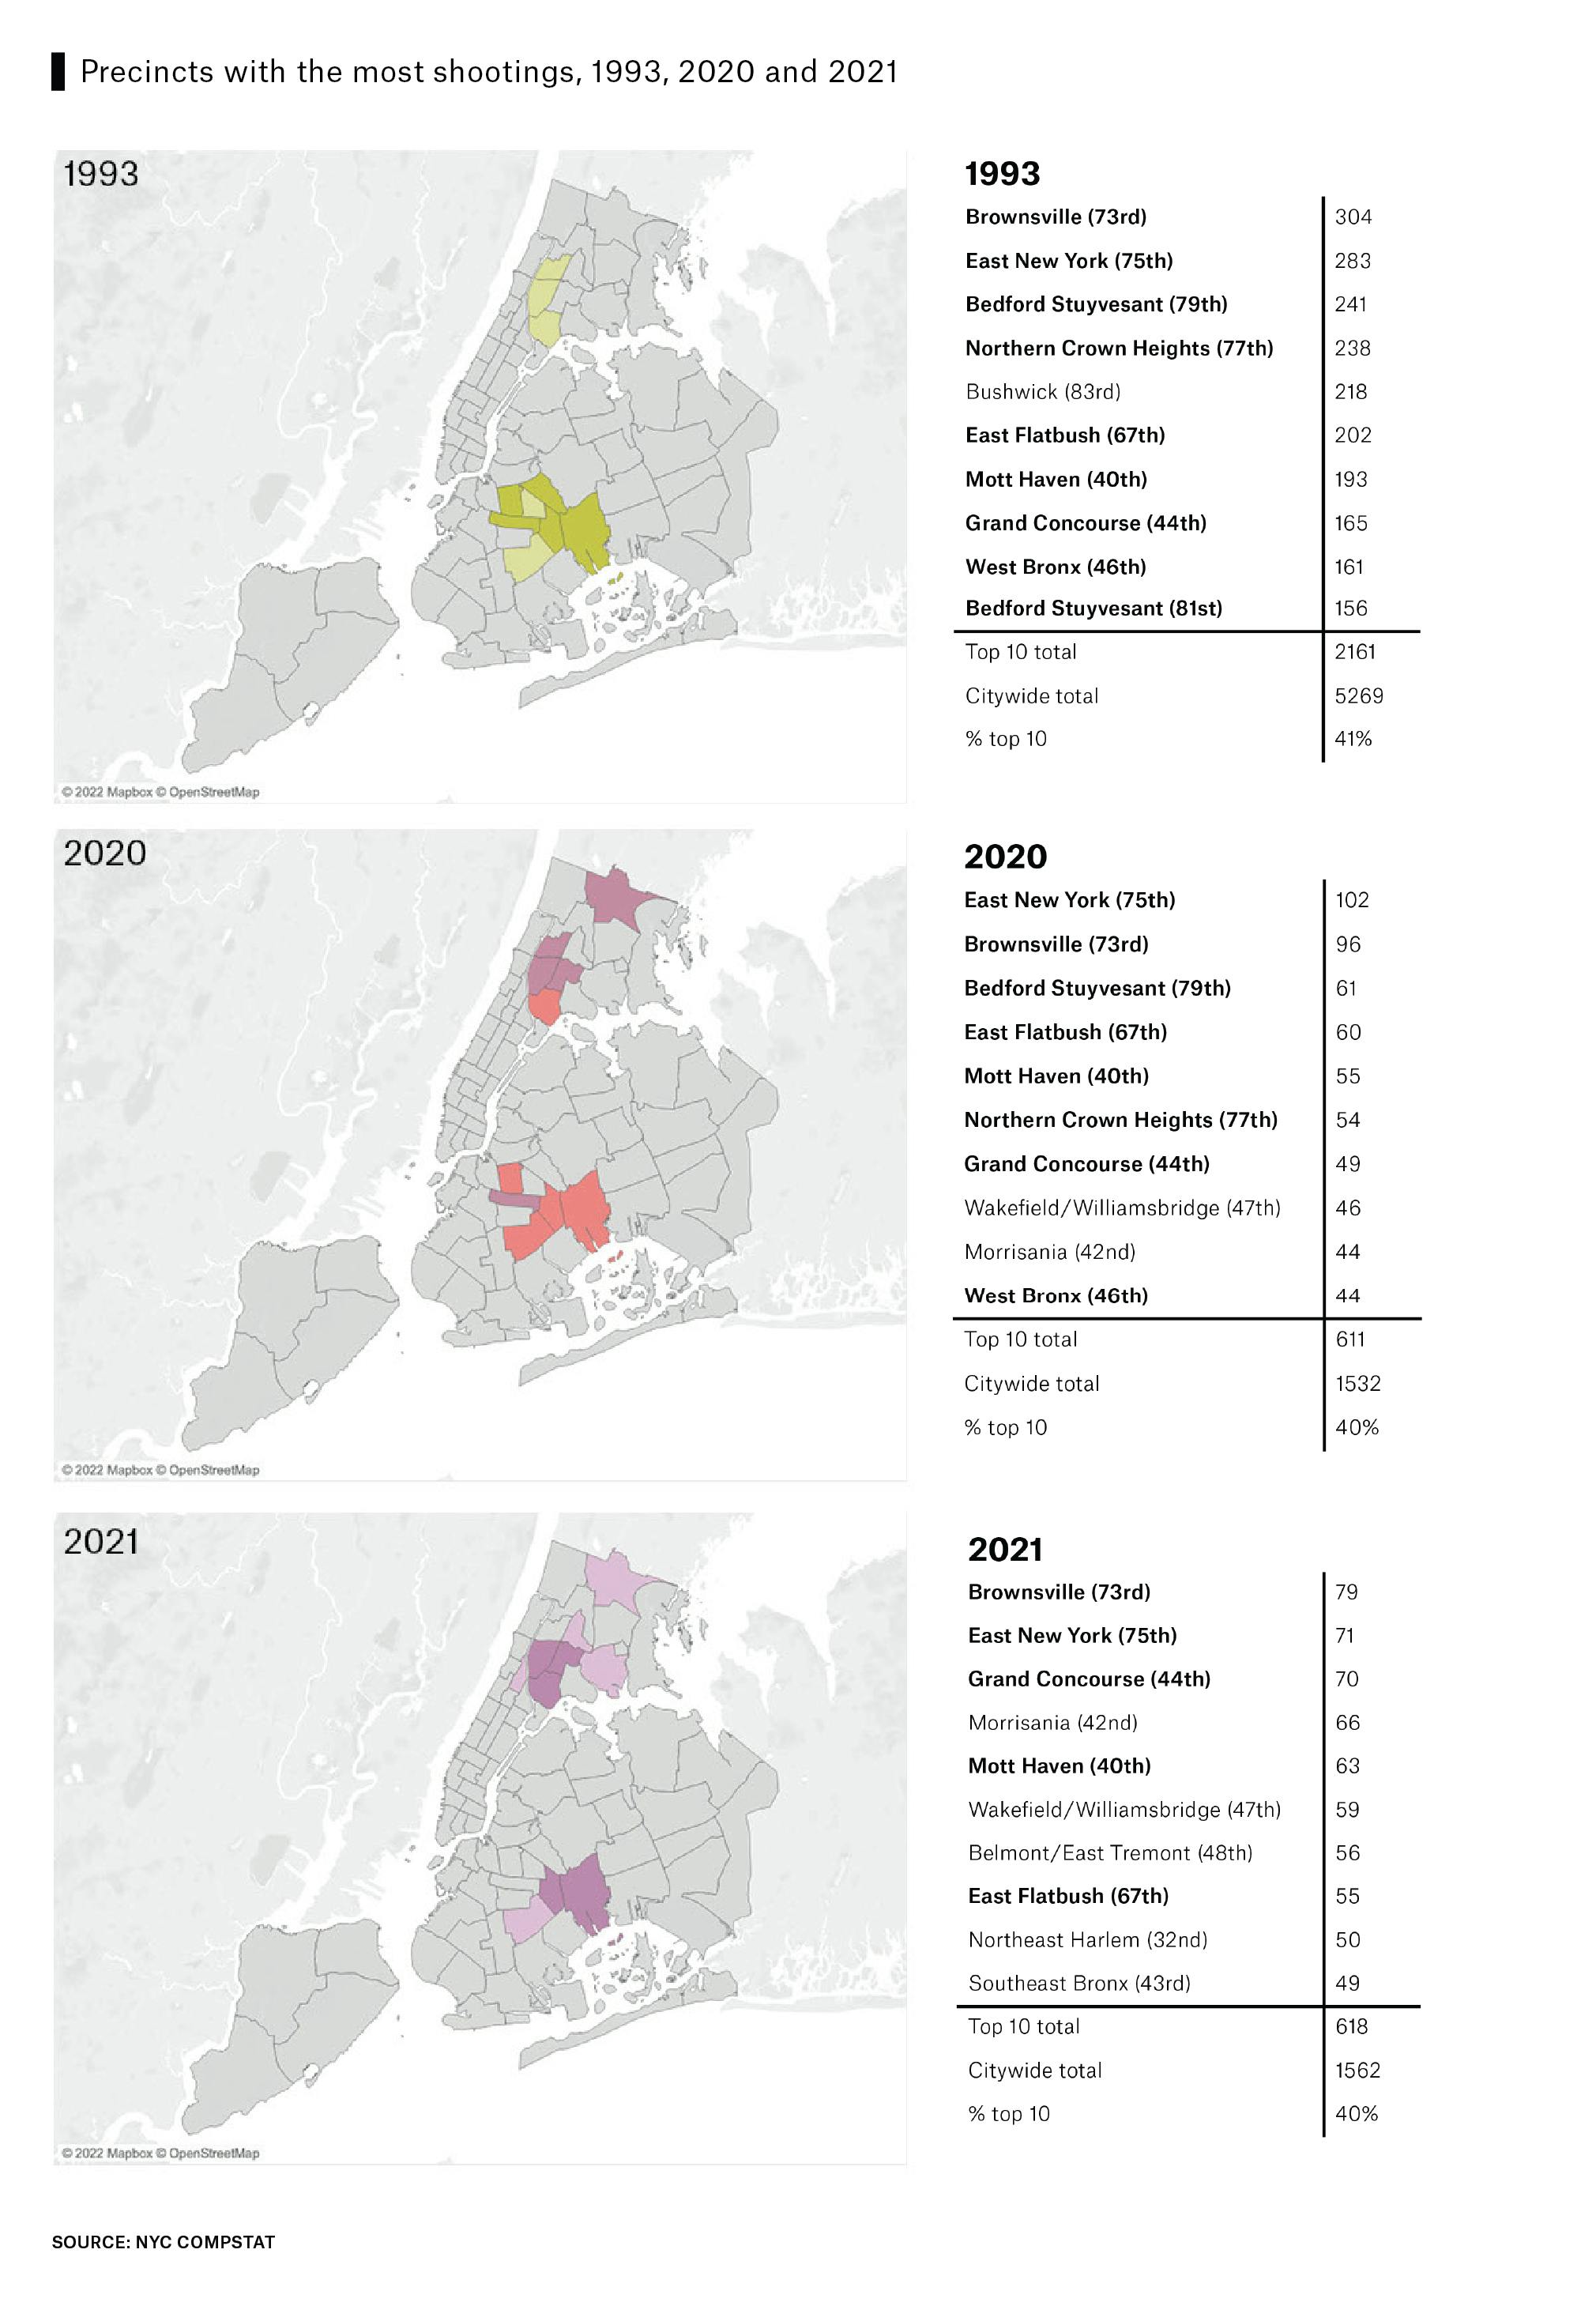 Figure 6. 3 sets of data points and shaded area maps show N, Y, C precincts with the most shootings in 1993, 2020, and 2021. Shootings were mostly concentrated in Brooklyn in 1993 but have increased in the Bronx over the years.